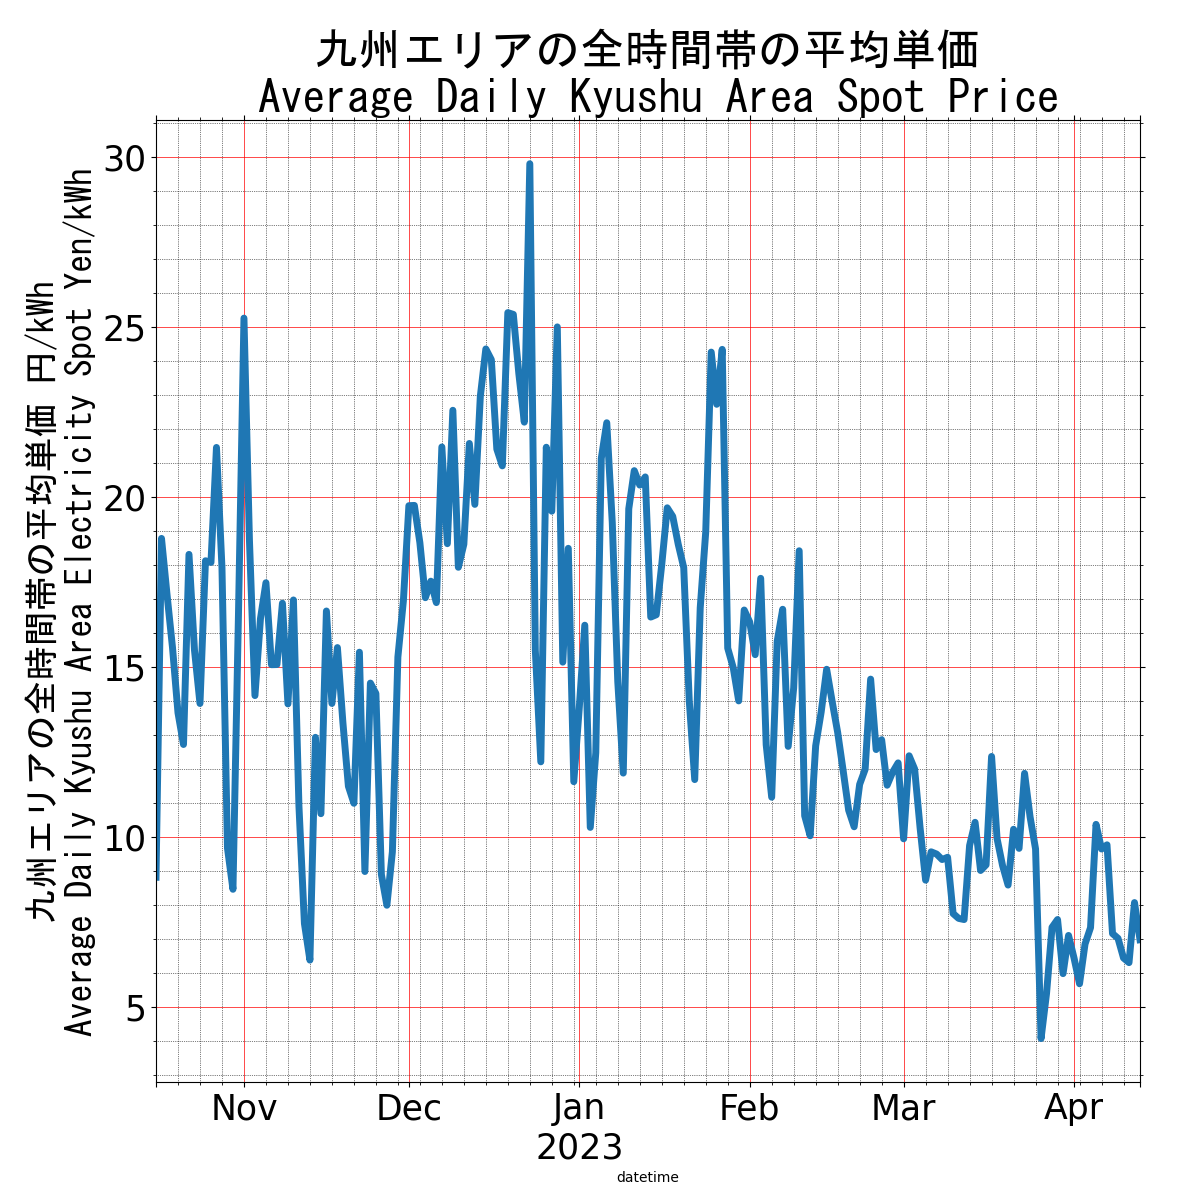 Japanese Electricity JEPX Kyushu Area Price plotted over time for the last 90 days